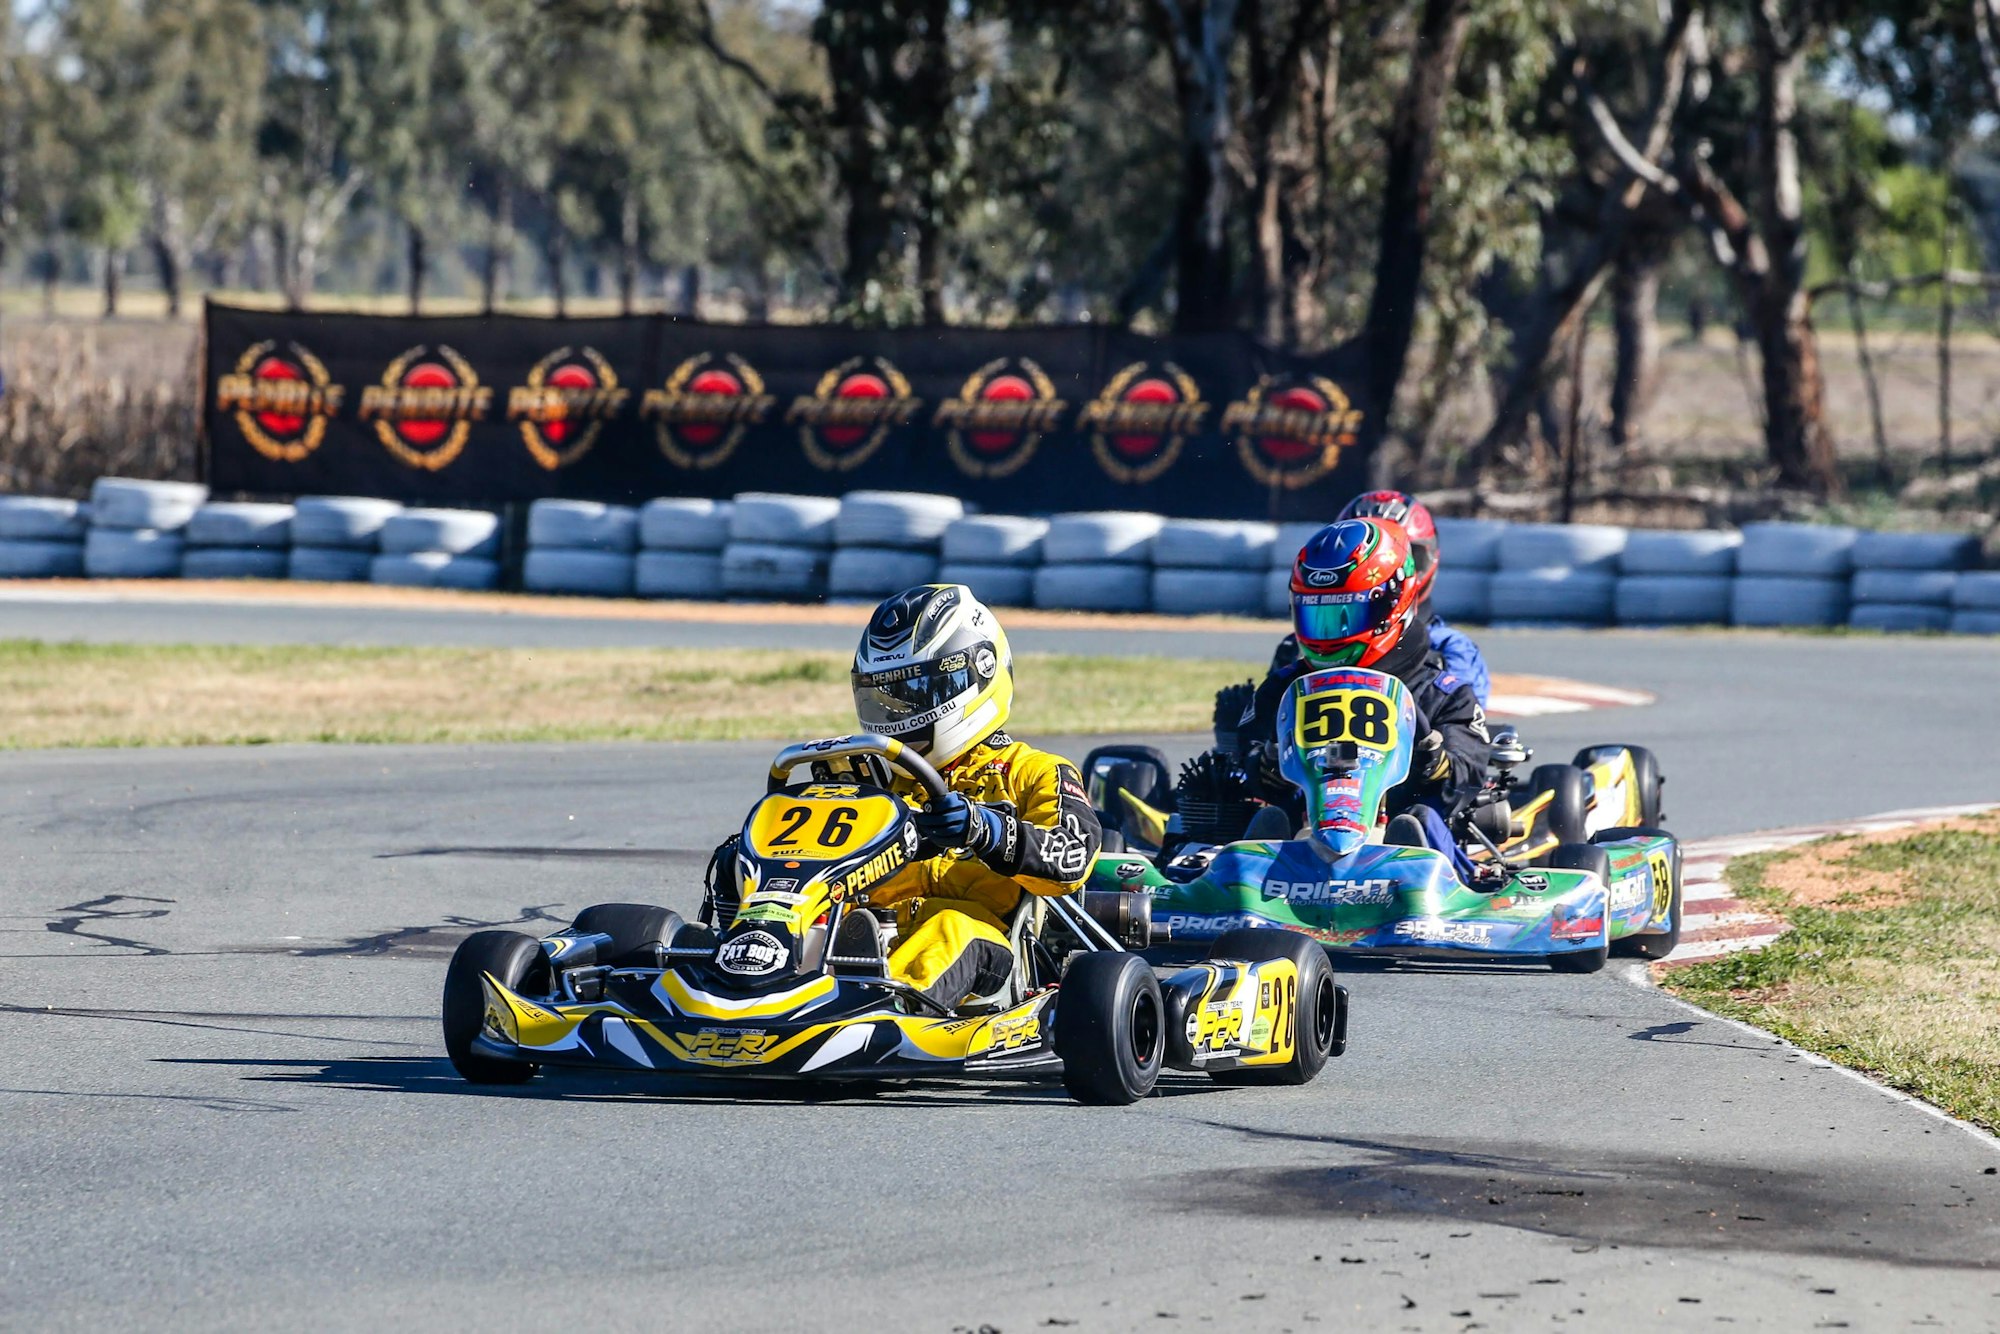 2 people racing in go-karts on an outdoor track